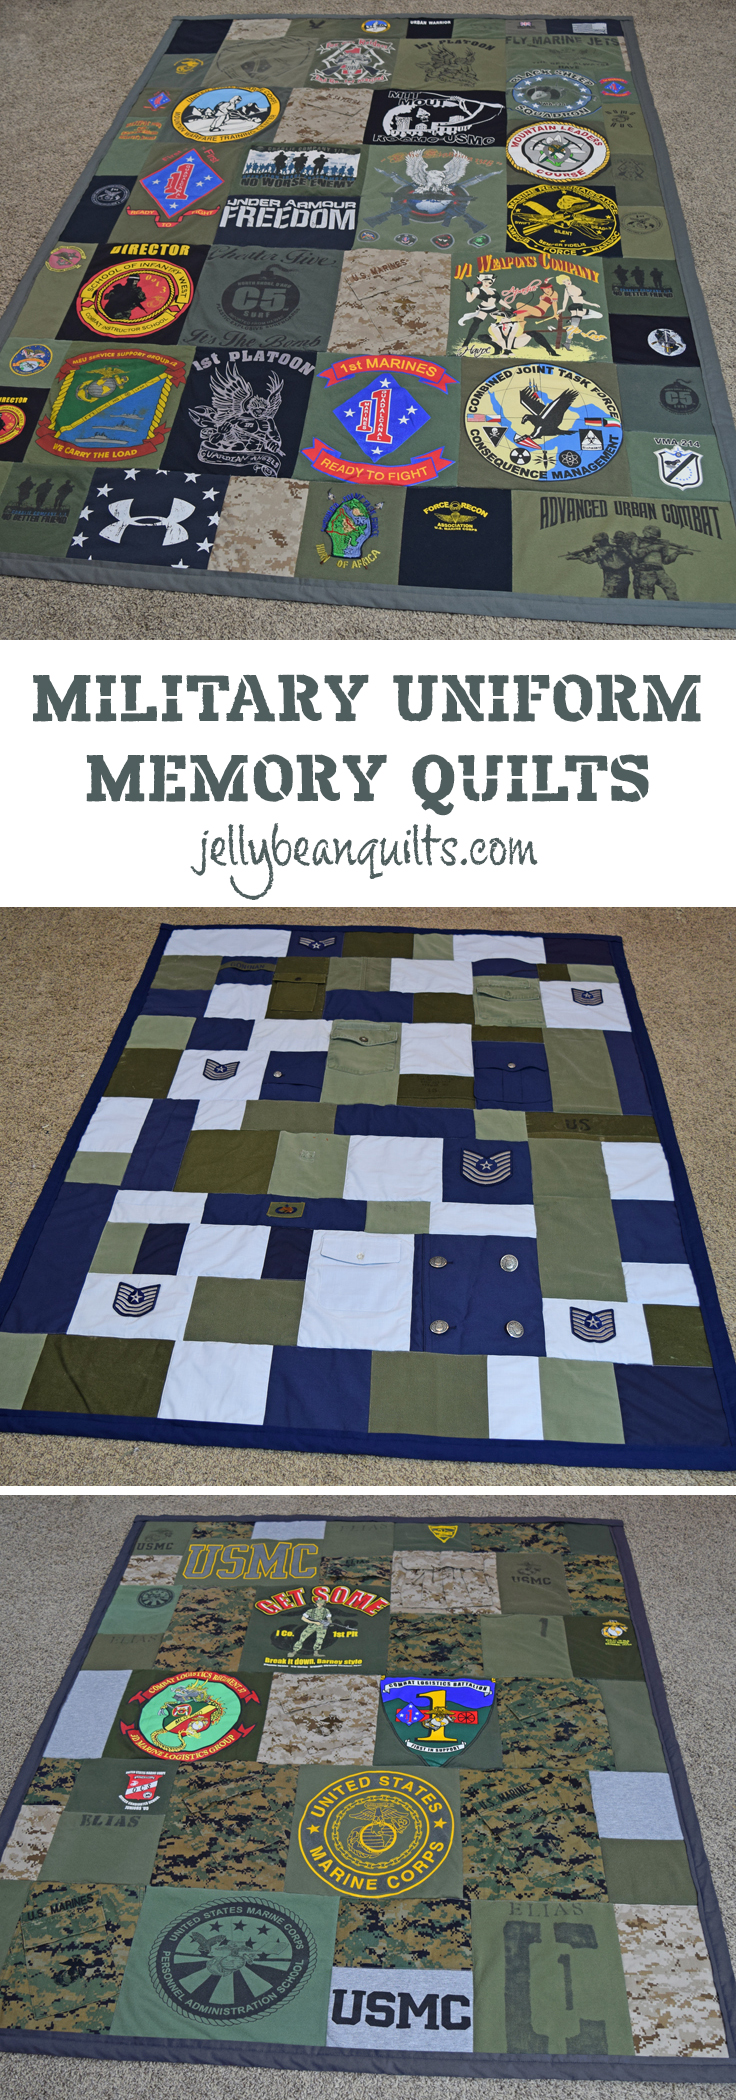 Military Quilts, Military Uniform Quilts, Military Memory Quilts from